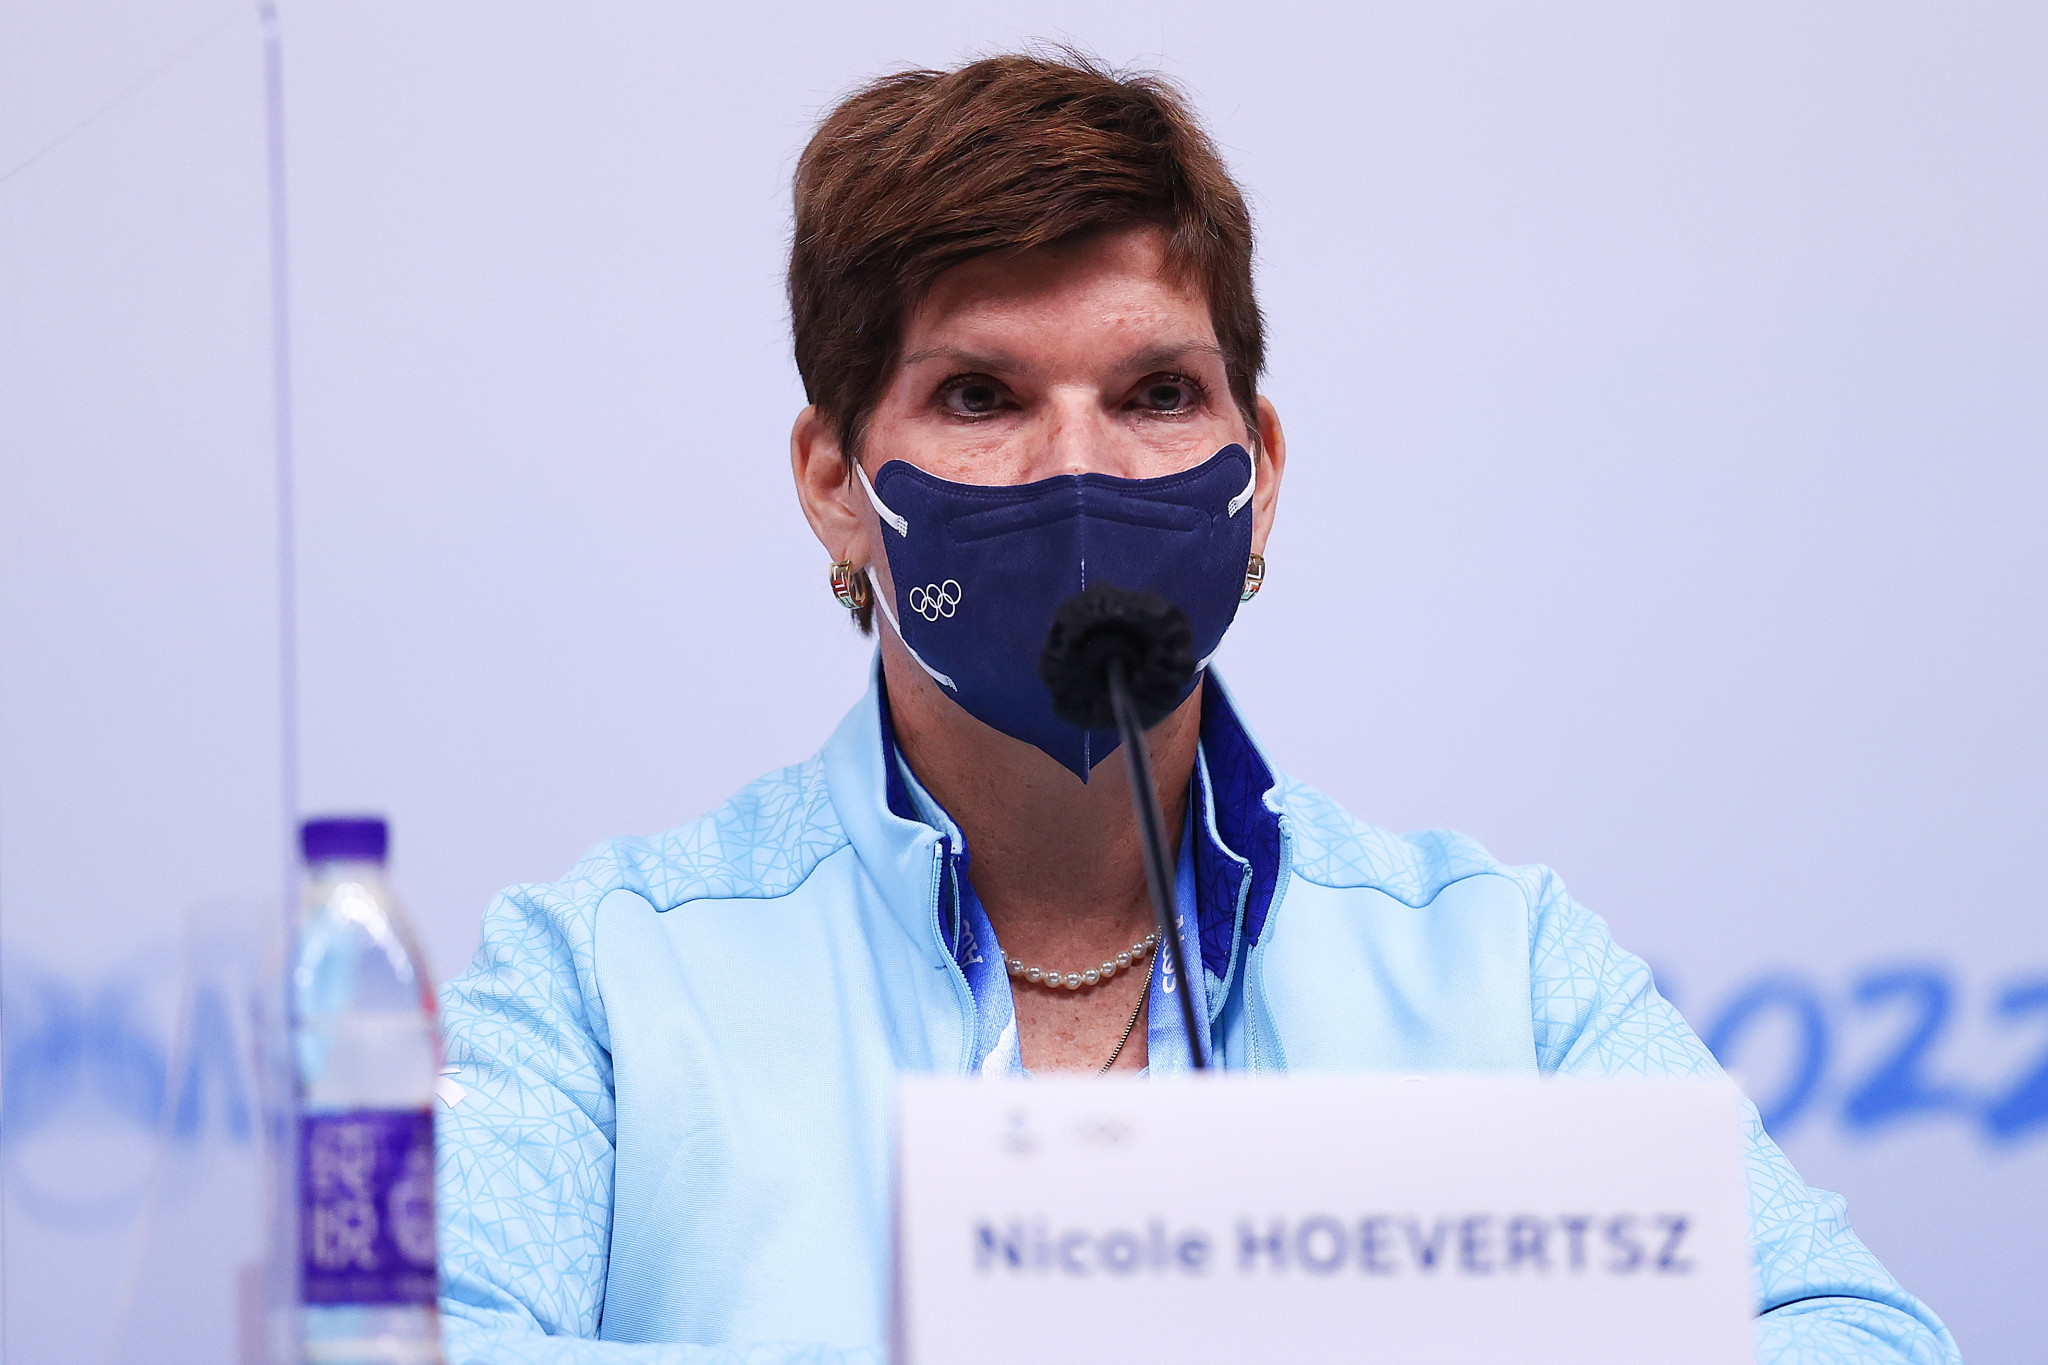 Nicole Hoevertsz has become an independent member of the IOC following a change in status ©Getty Images